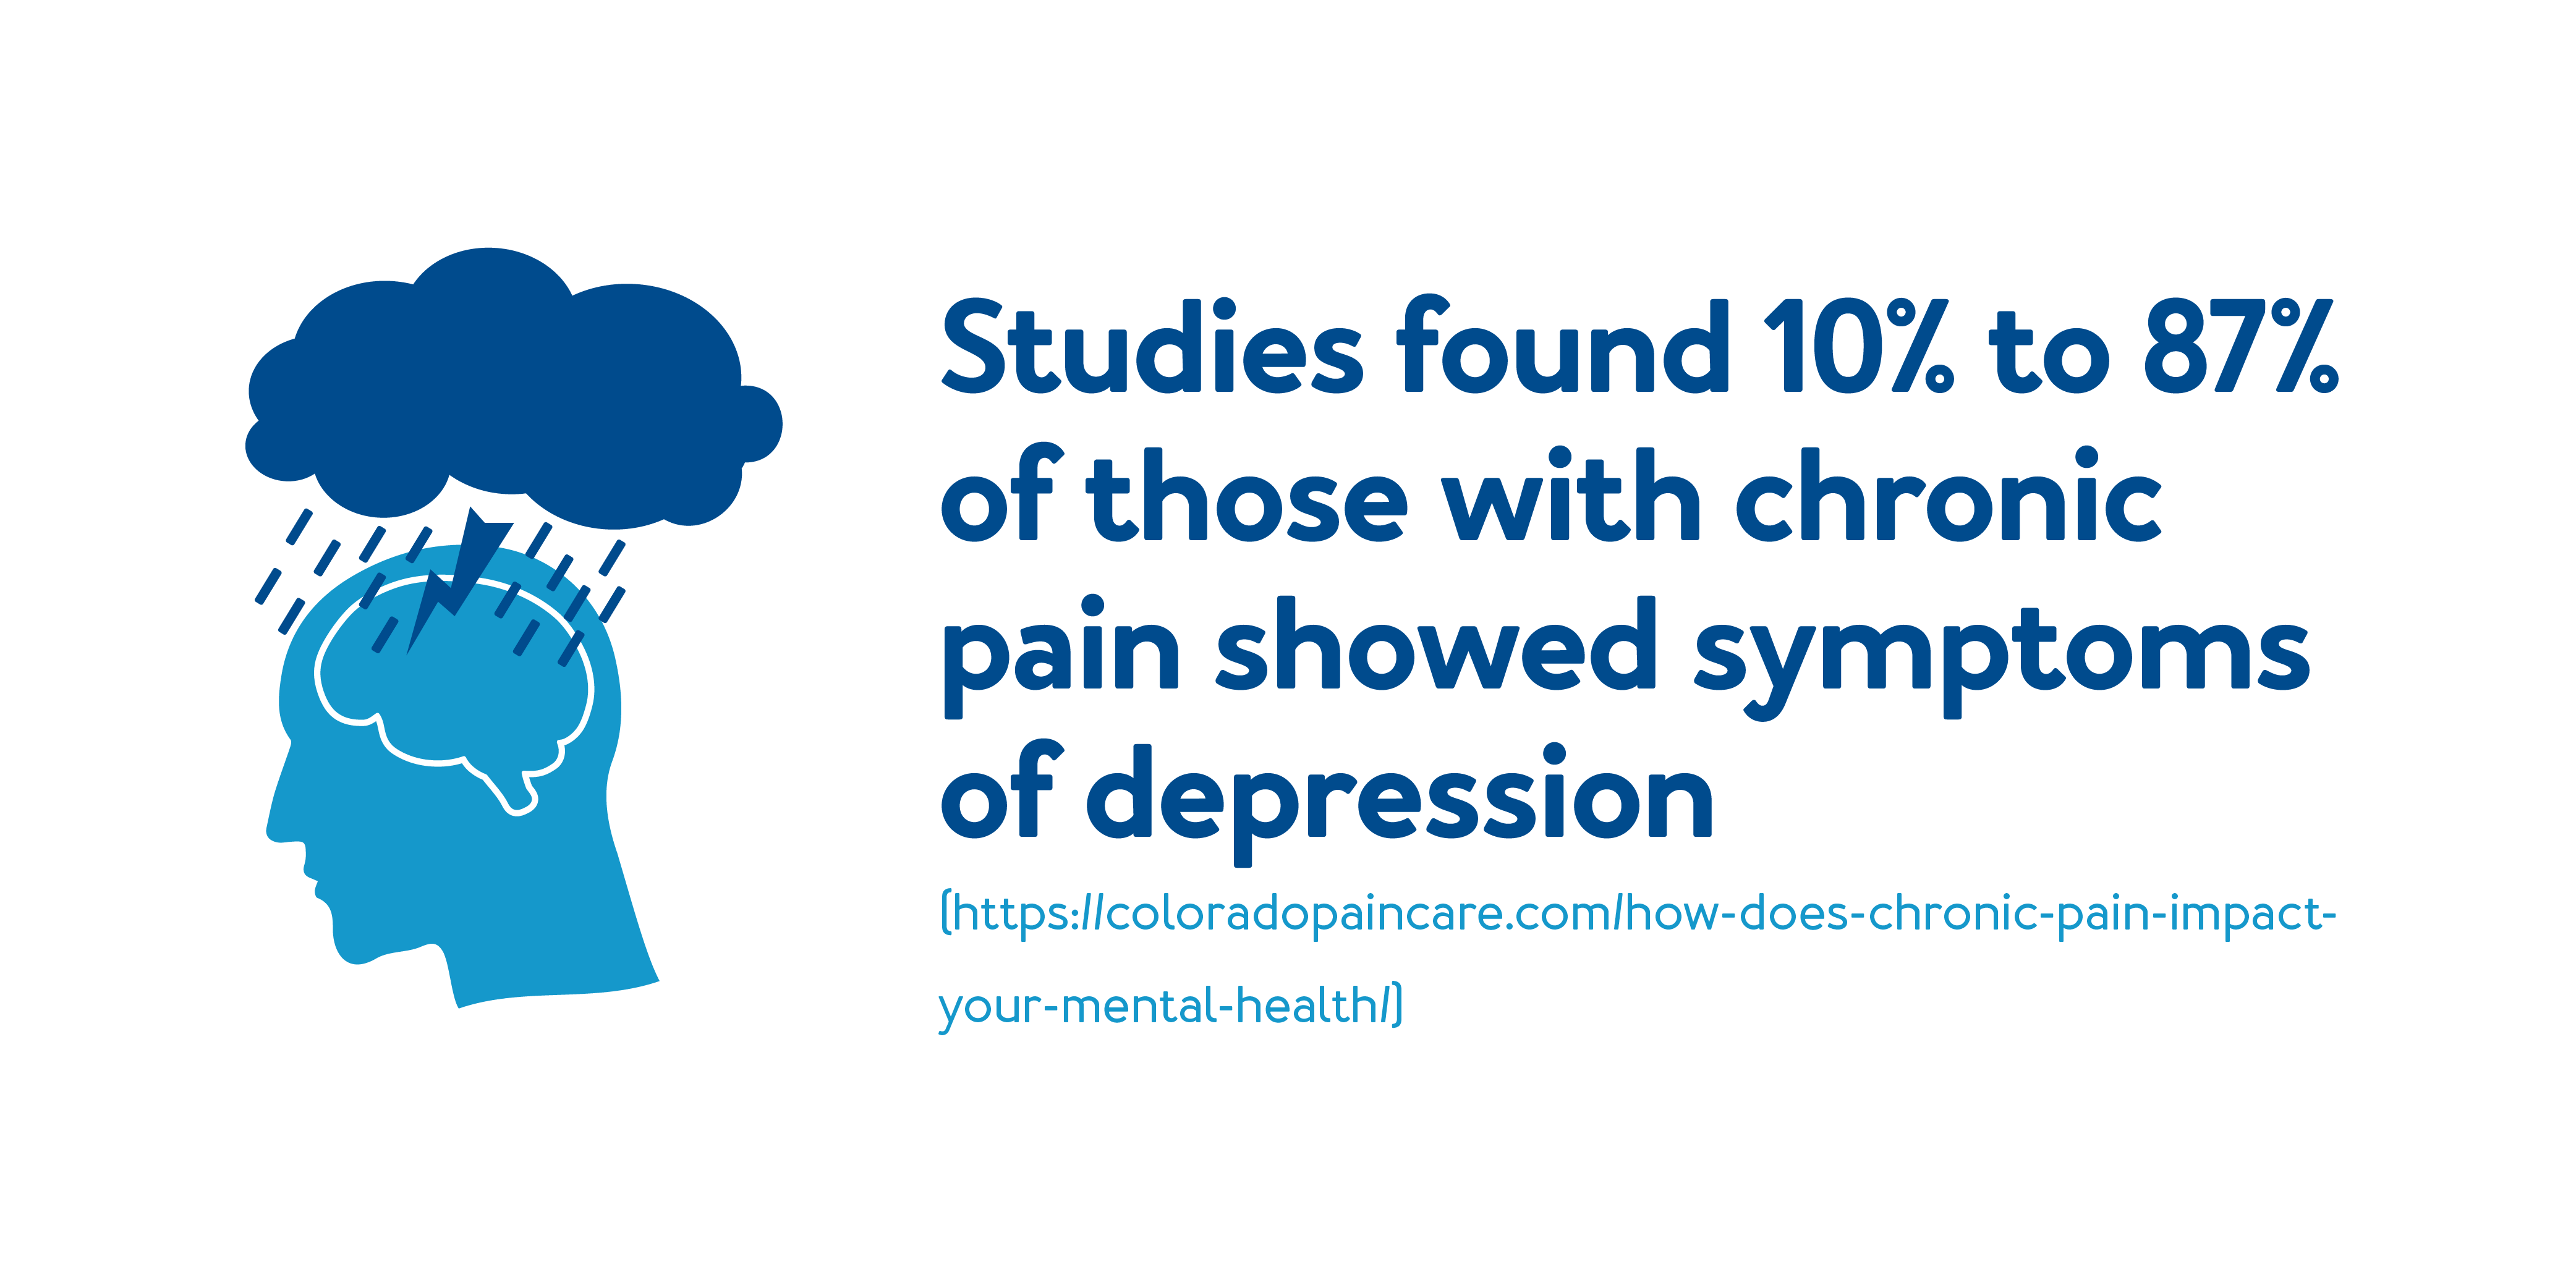 Studies found 10% to 87% of those with chronic pain showed symptoms of depression.